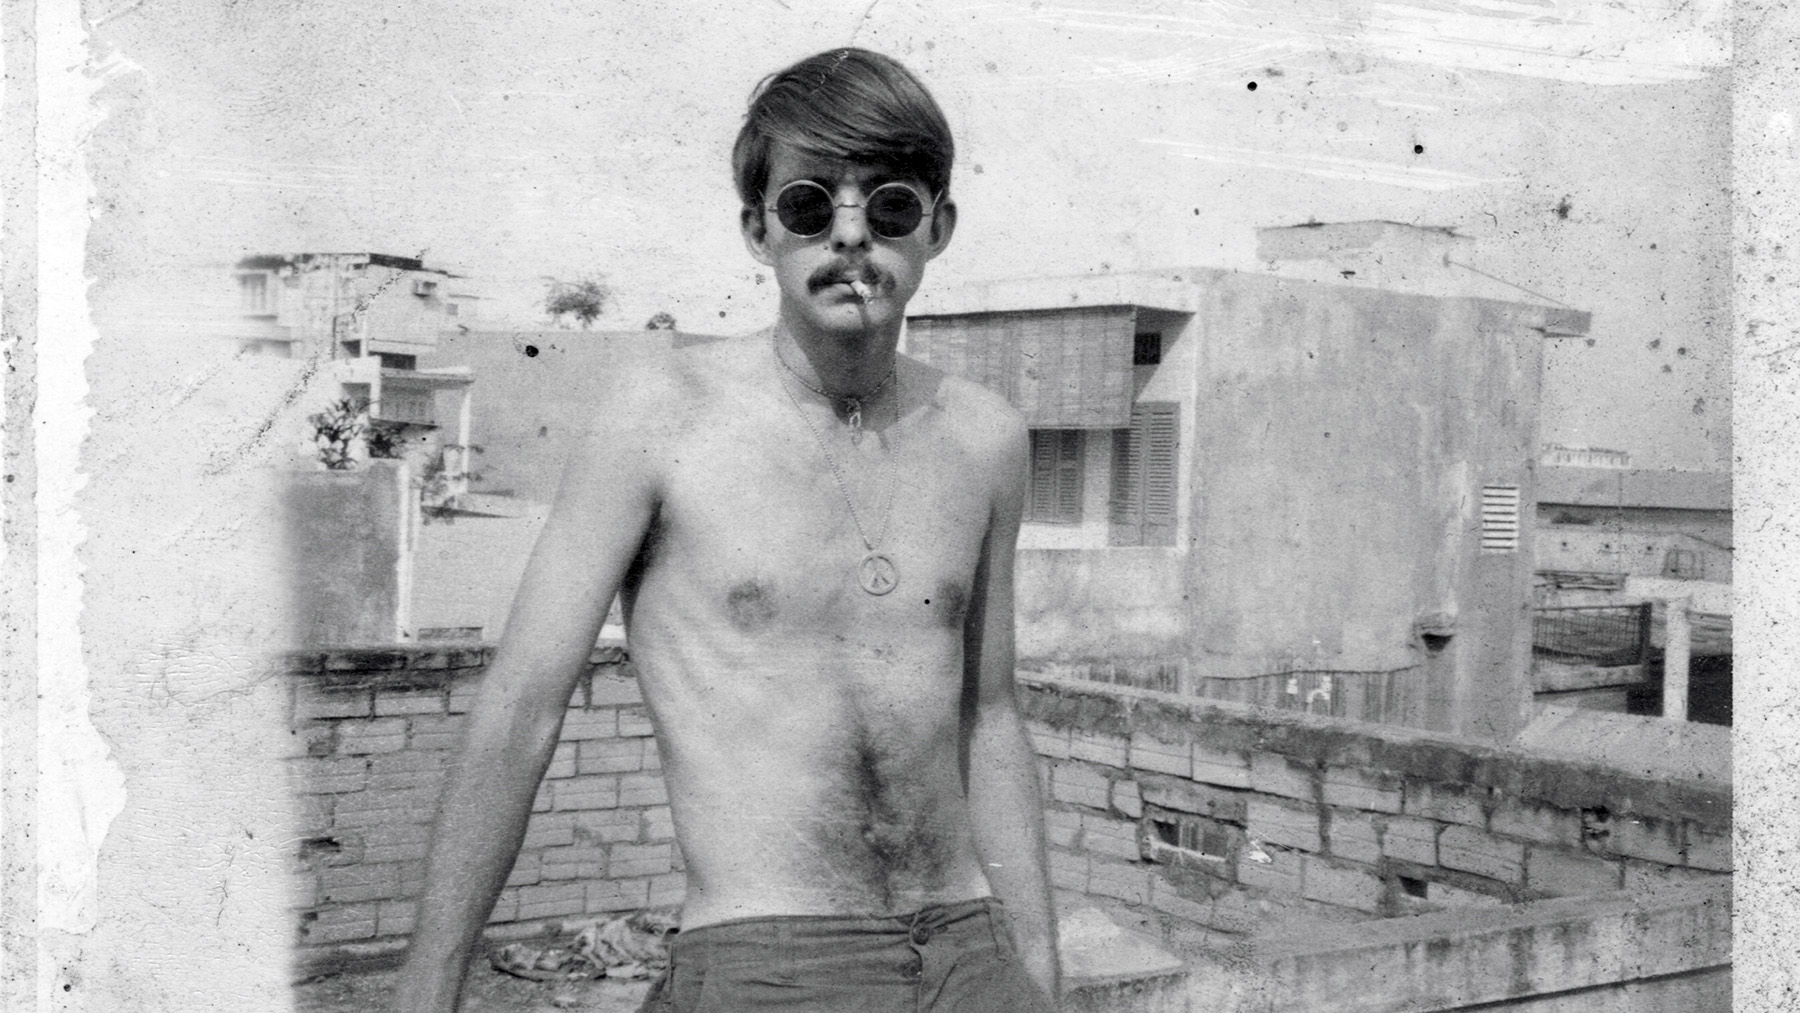 black and white image of Jimmy, shirtless, in Saigon. Courtesy of Peter McDowell